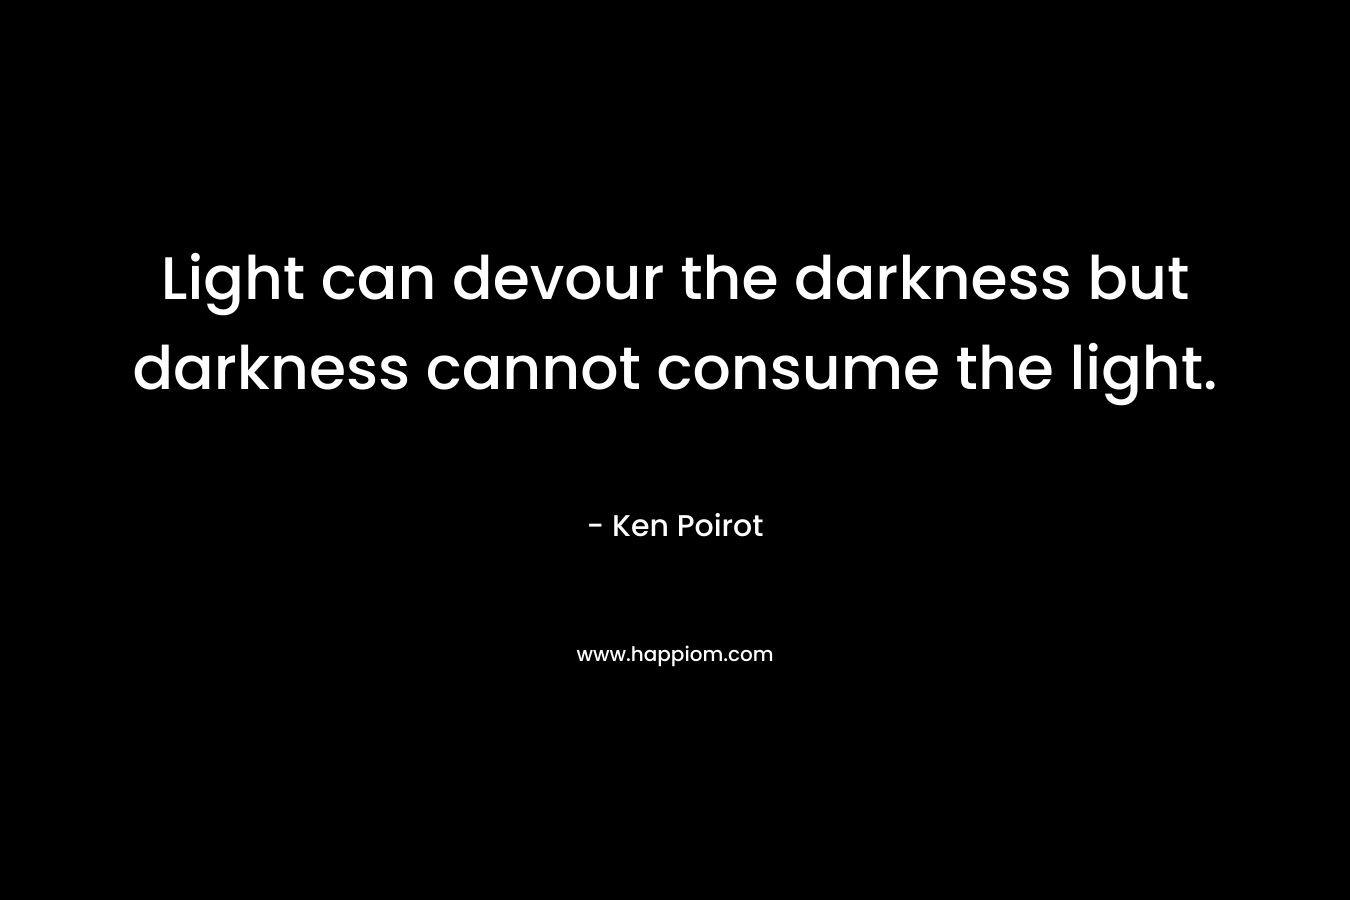 Light can devour the darkness but darkness cannot consume the light.